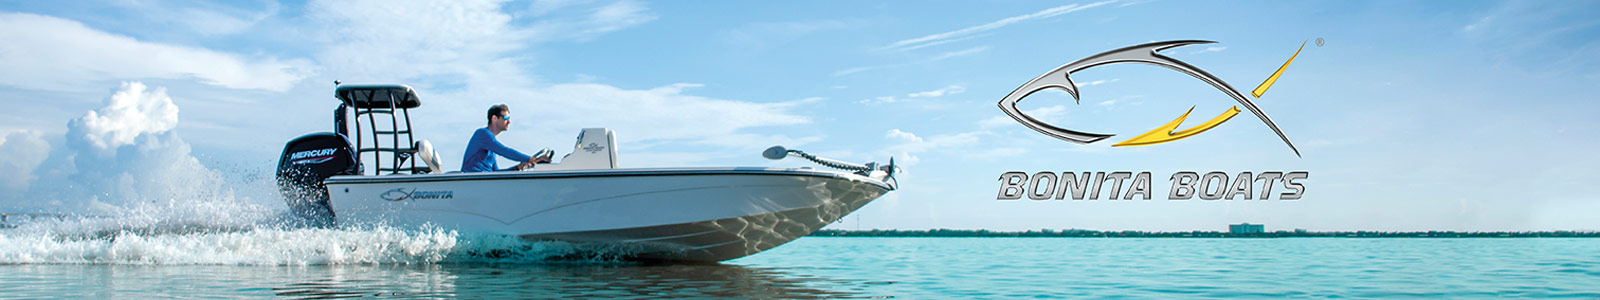  Bonita Boats (Beautiful Boats) named for the fish and the beauty of the ocean.